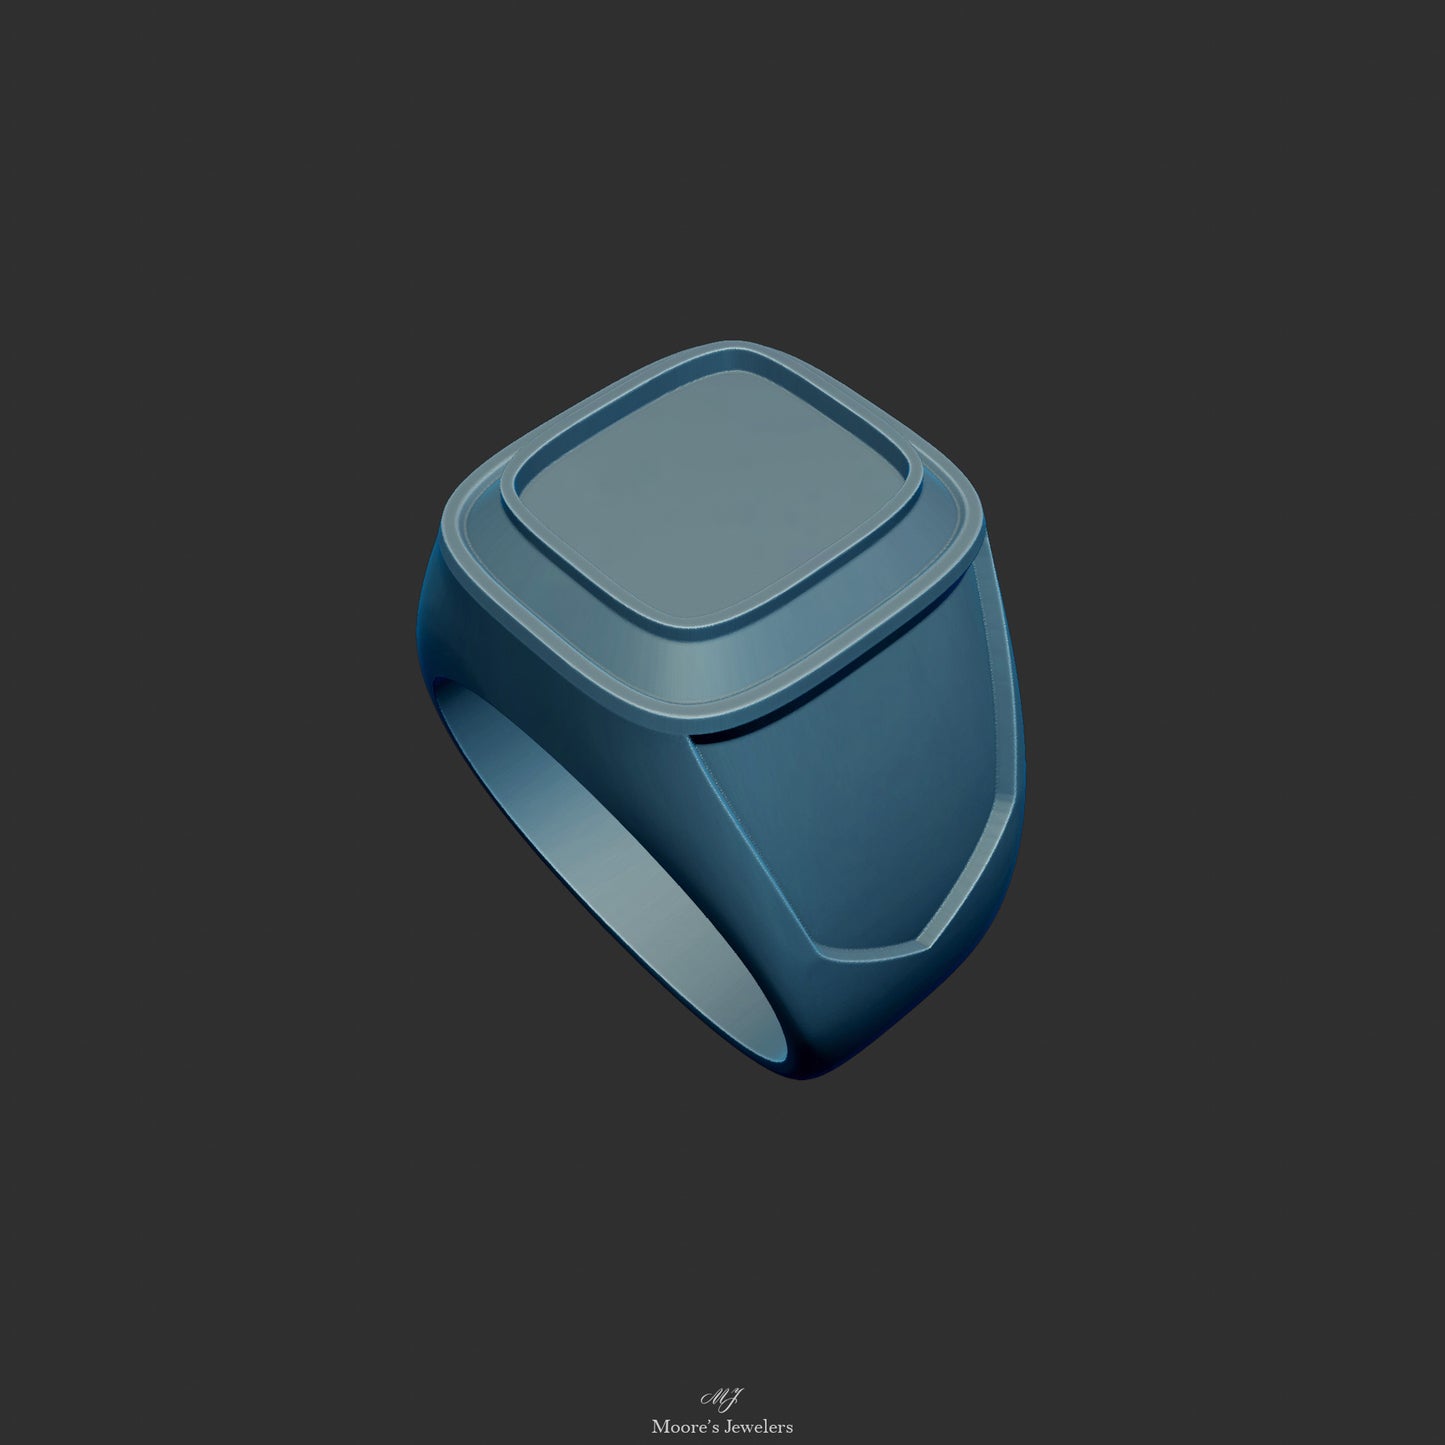 Textured or Smooth Class Ring 3d Model